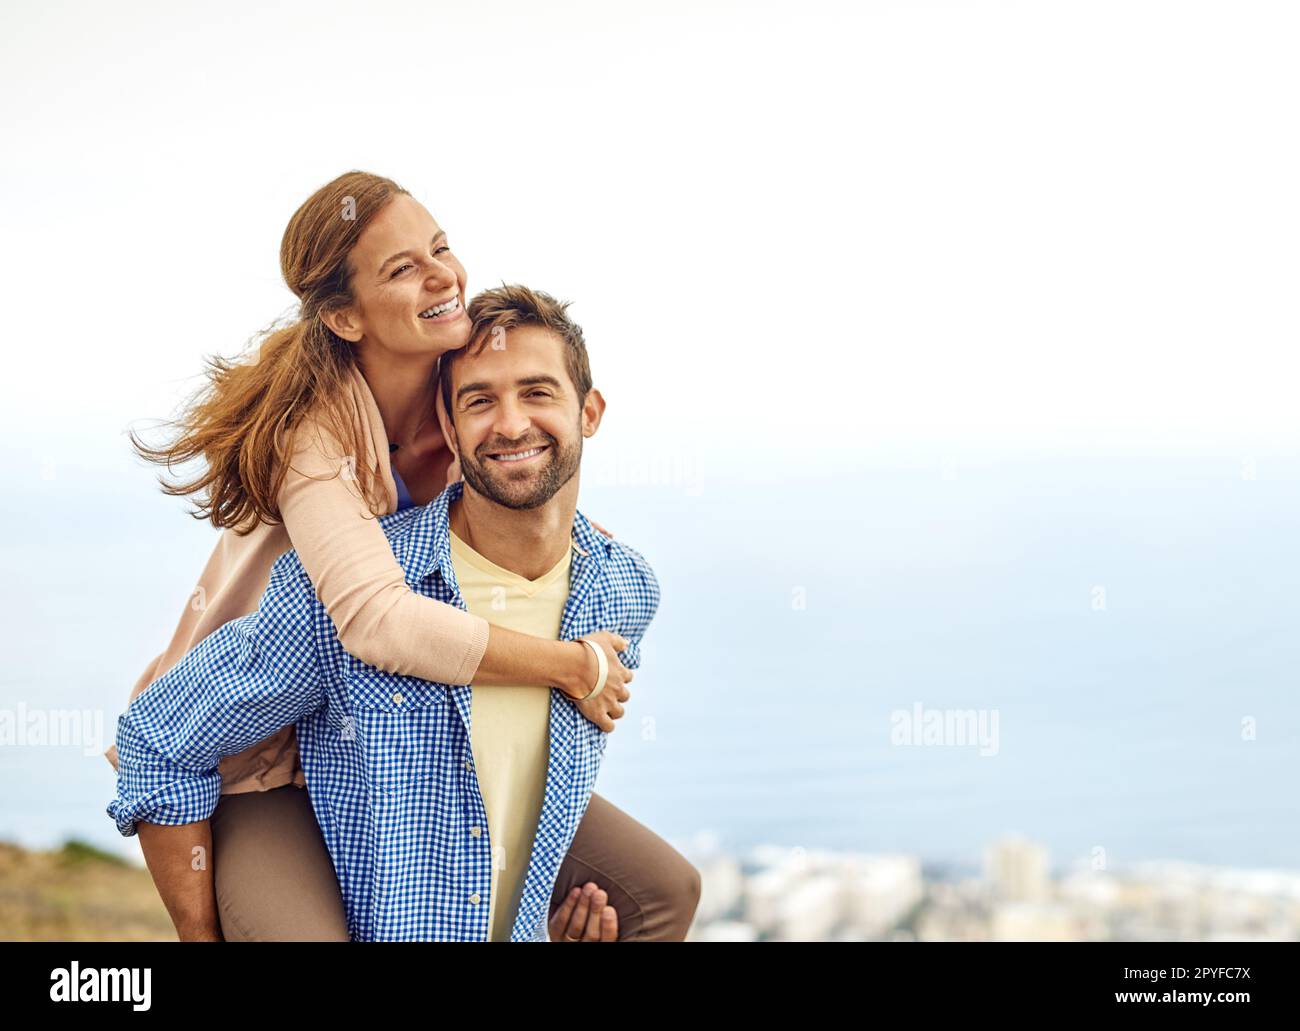 Making the most of a sunny day. a man piggybacking his girlfriend while spending the day outdoors. Stock Photo